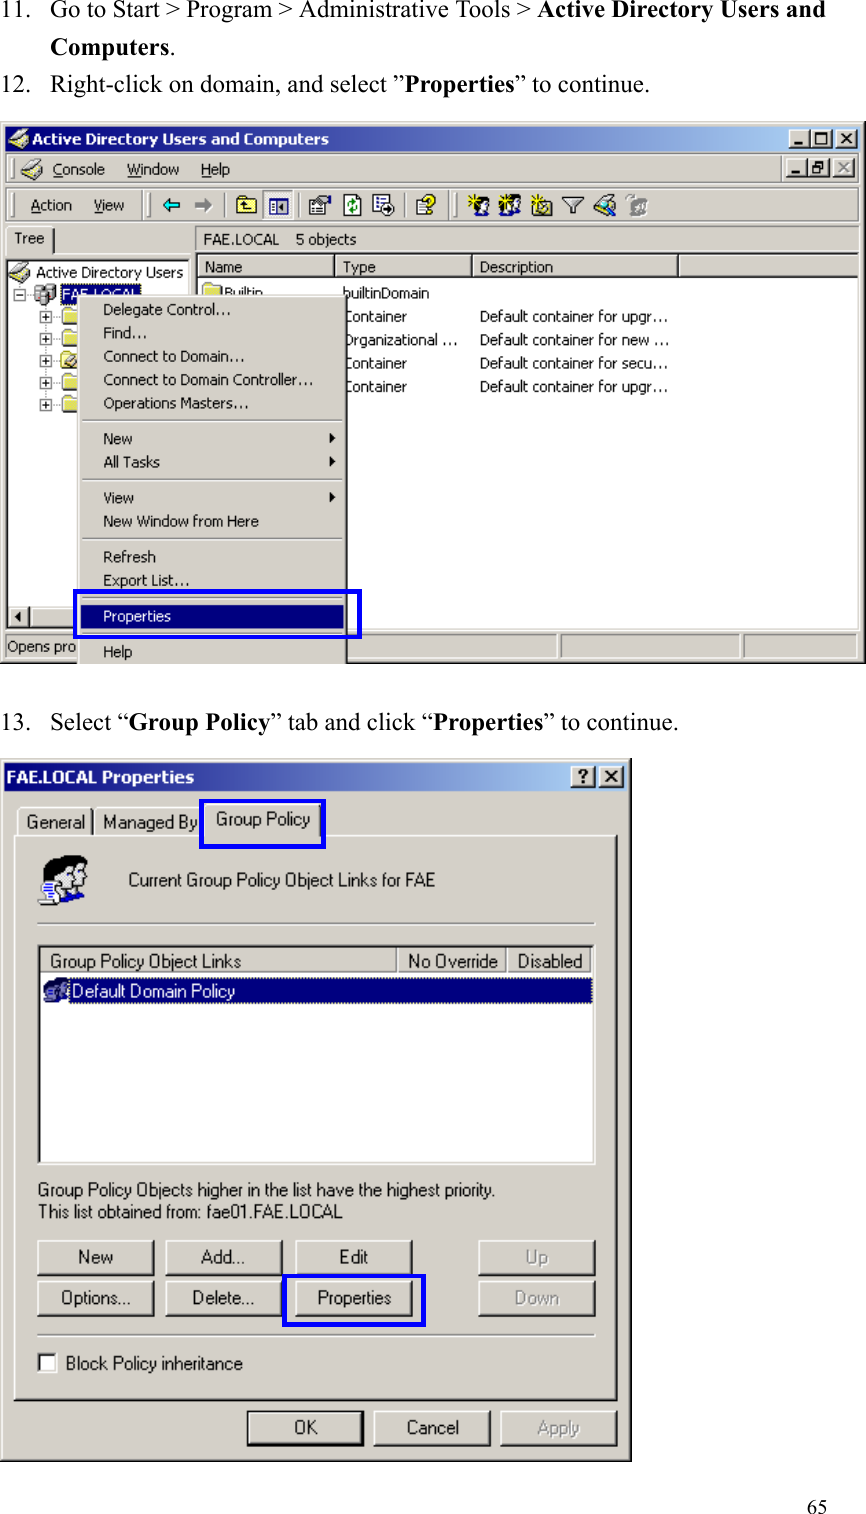 6511. Go to Start &gt; Program &gt; Administrative Tools &gt; Active Directory Users andComputers.12. Right-click on domain, and select ”Properties” to continue.13. Select “Group Policy” tab and click “Properties” to continue.